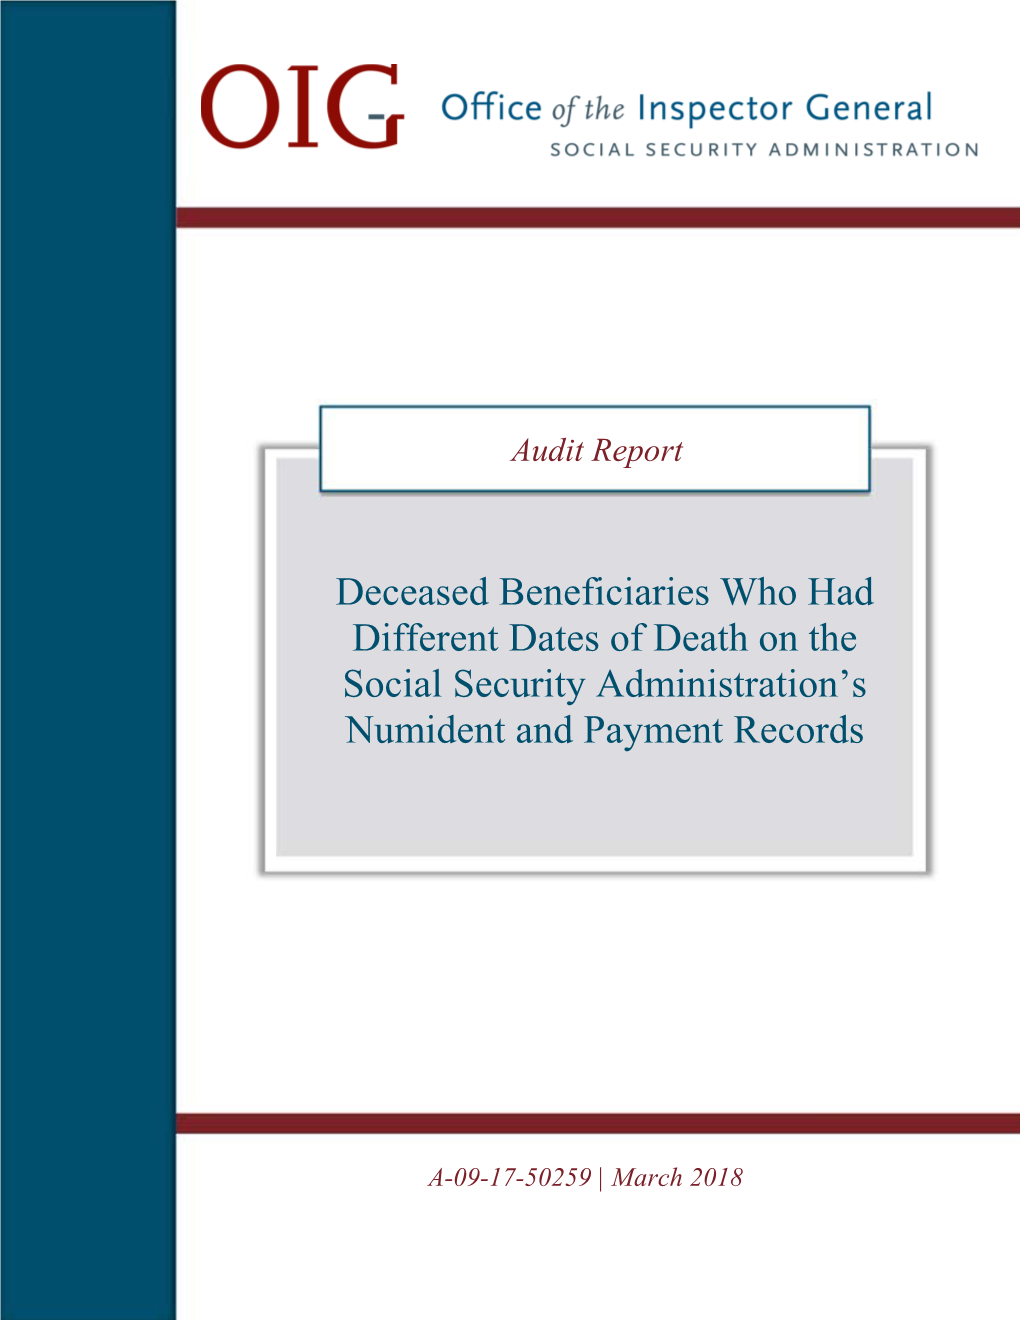 Deceased Beneficiaries Who Had Different Dates of Death on the Social Security Administration’S Numident and Payment Records